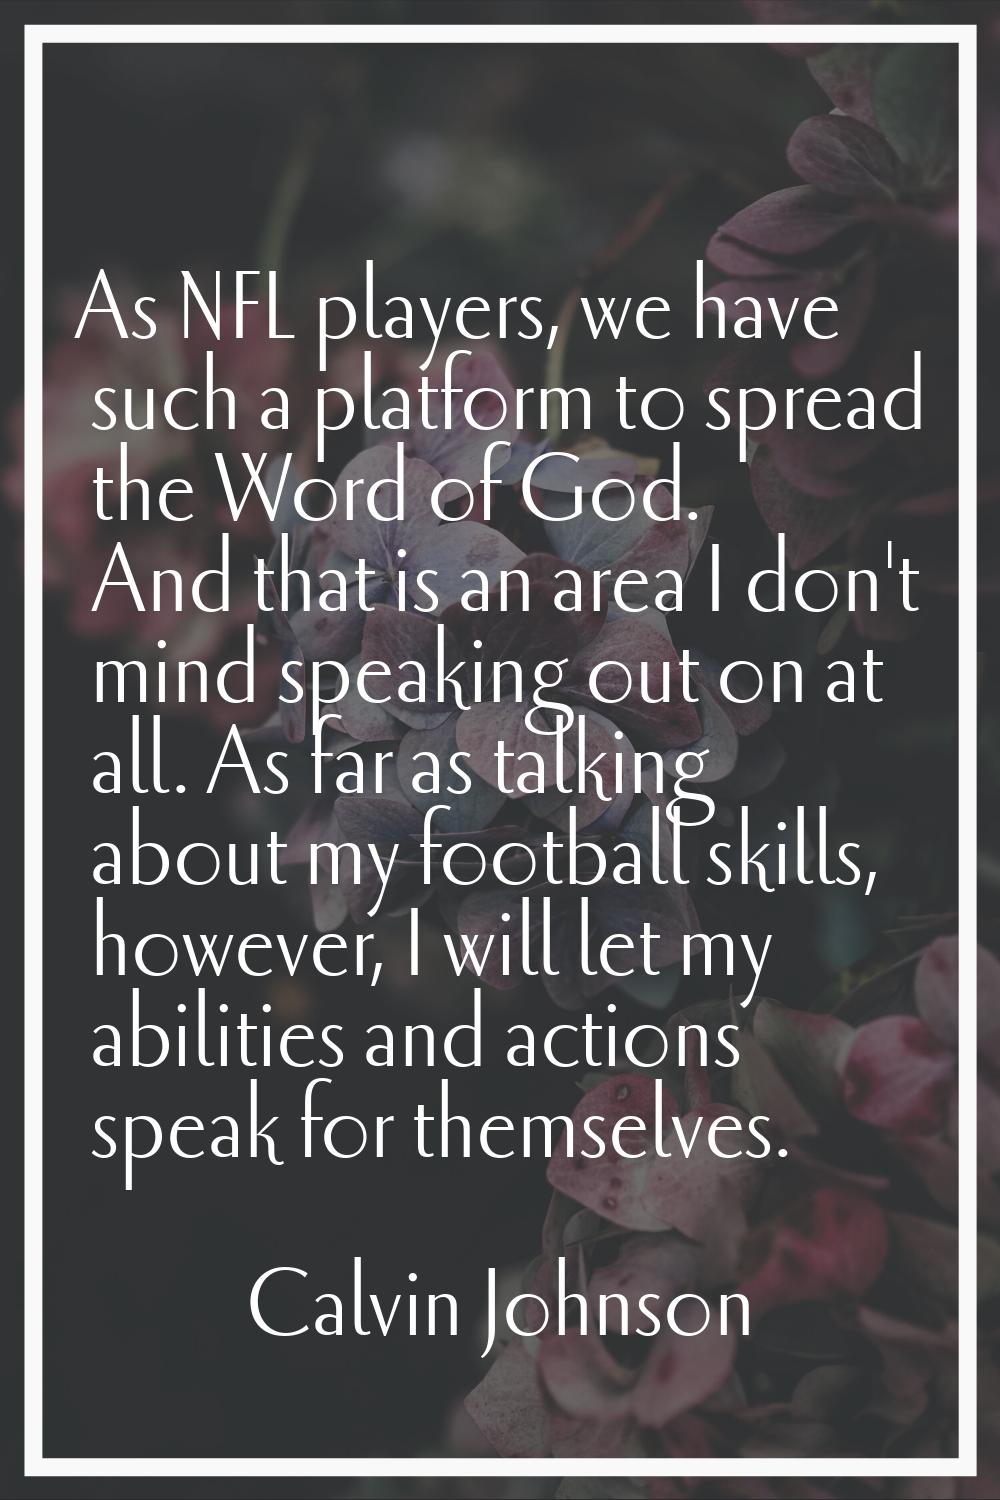 As NFL players, we have such a platform to spread the Word of God. And that is an area I don't mind